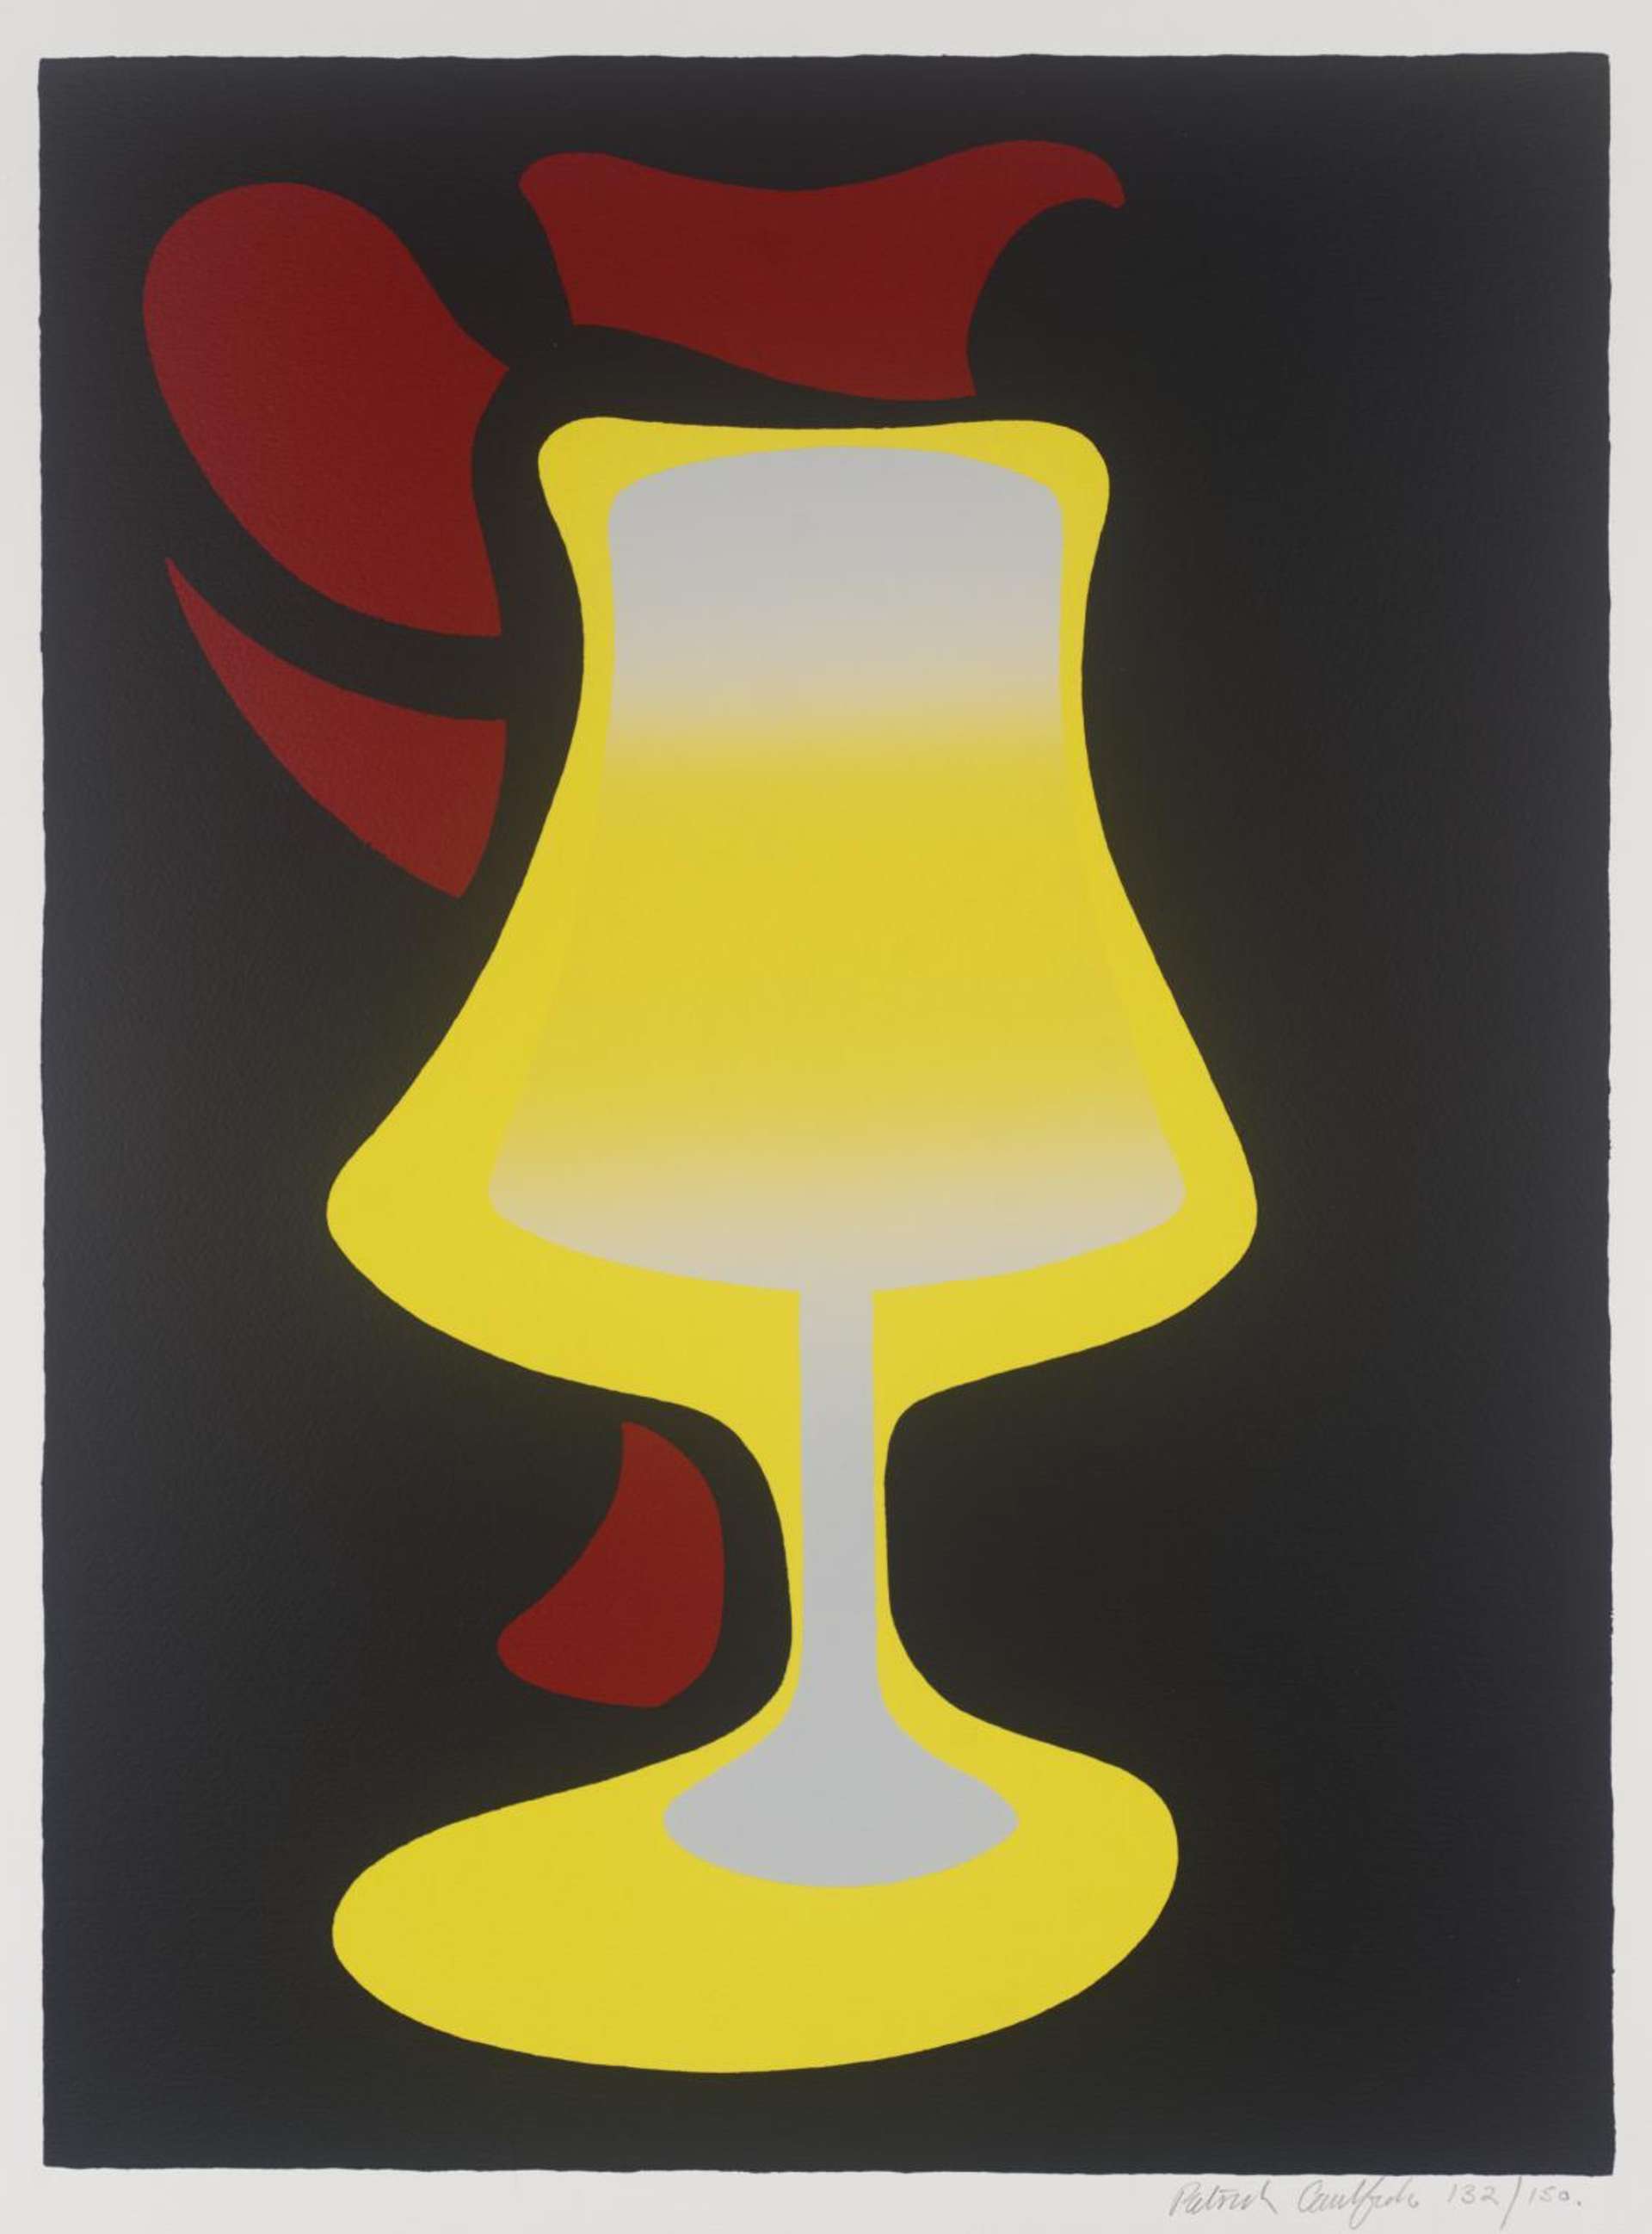 An image of the print Red Jug and Lamp by Patrick Caulfield. It depicts a red jug, with a white lamp’s yellow silhouette in the foreground. Both objects against a black background.